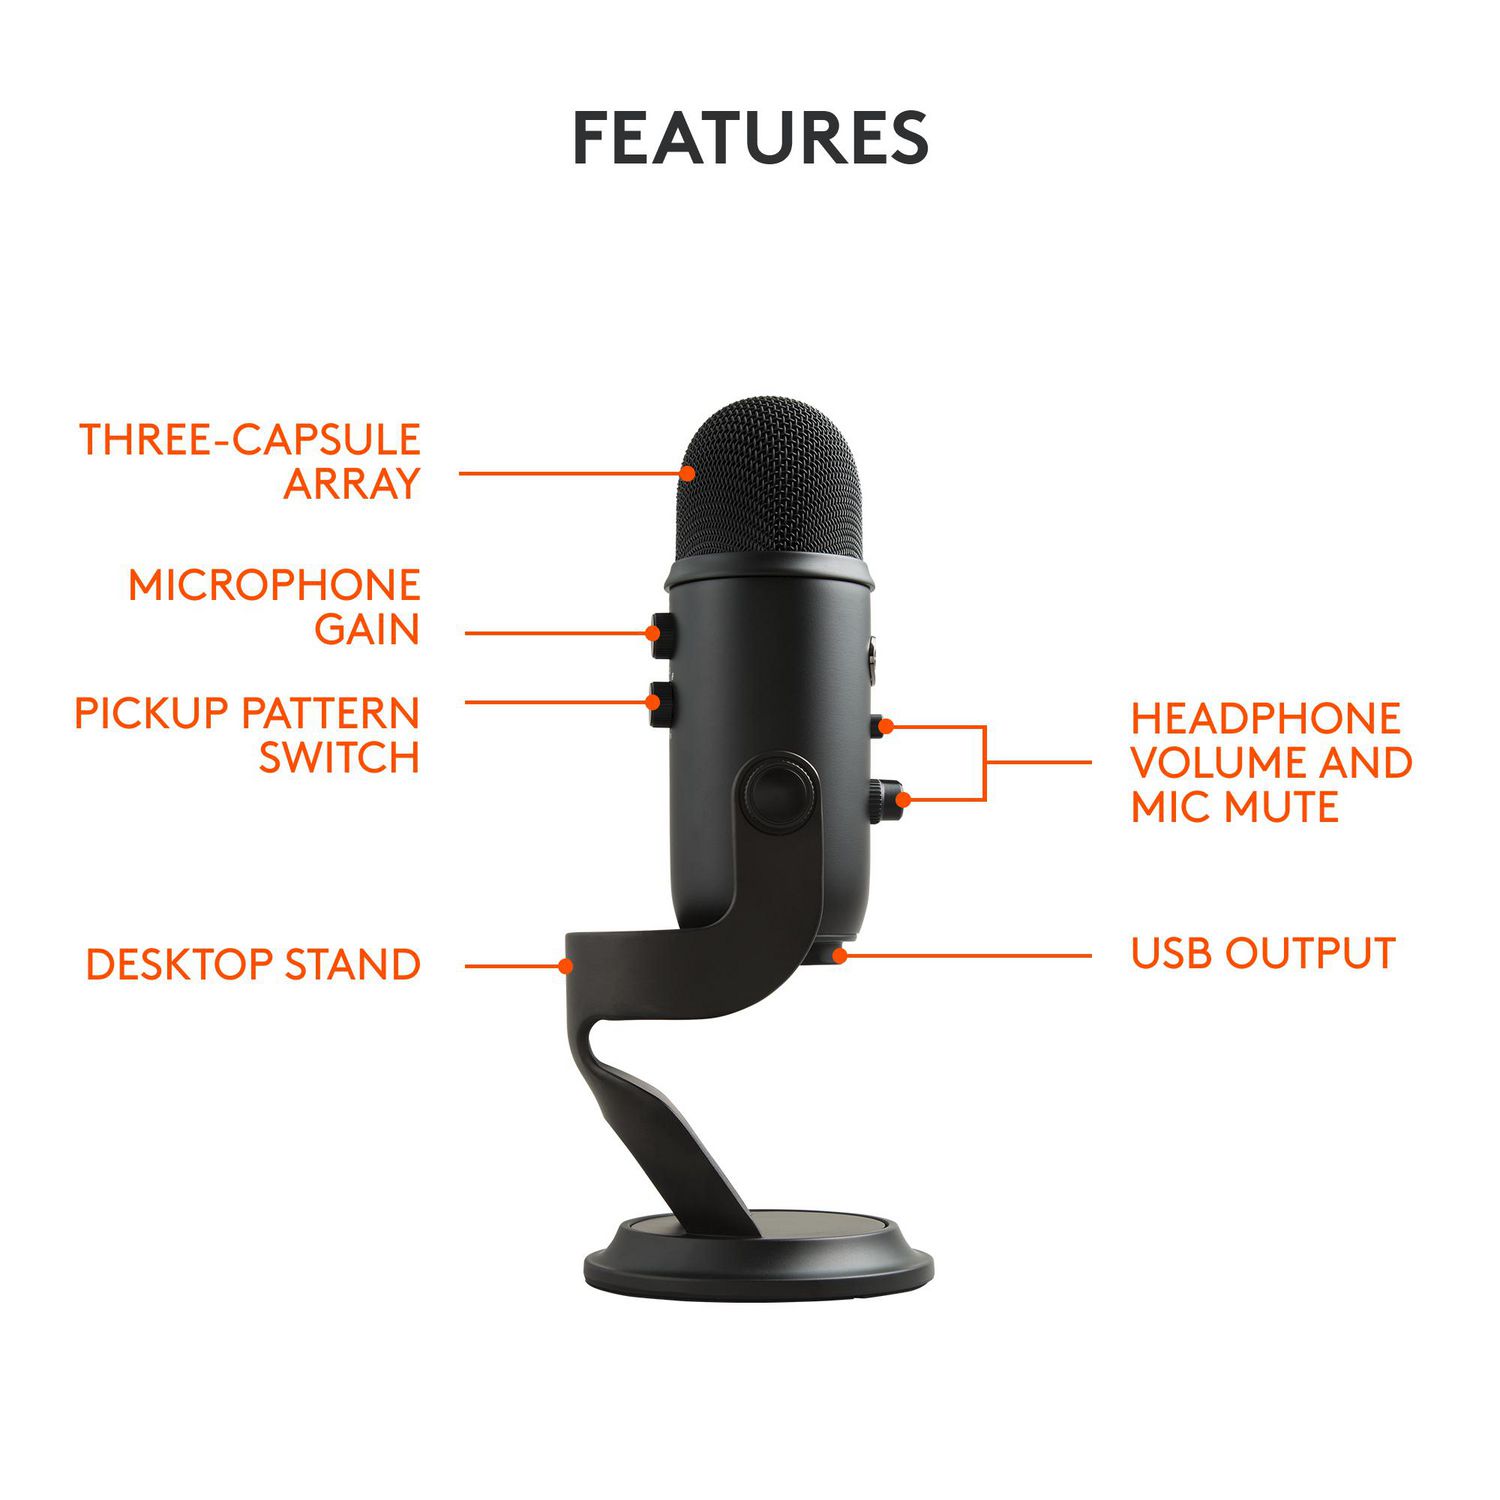 Blue Yeti USB Microphone for Recording, Streaming, Gaming